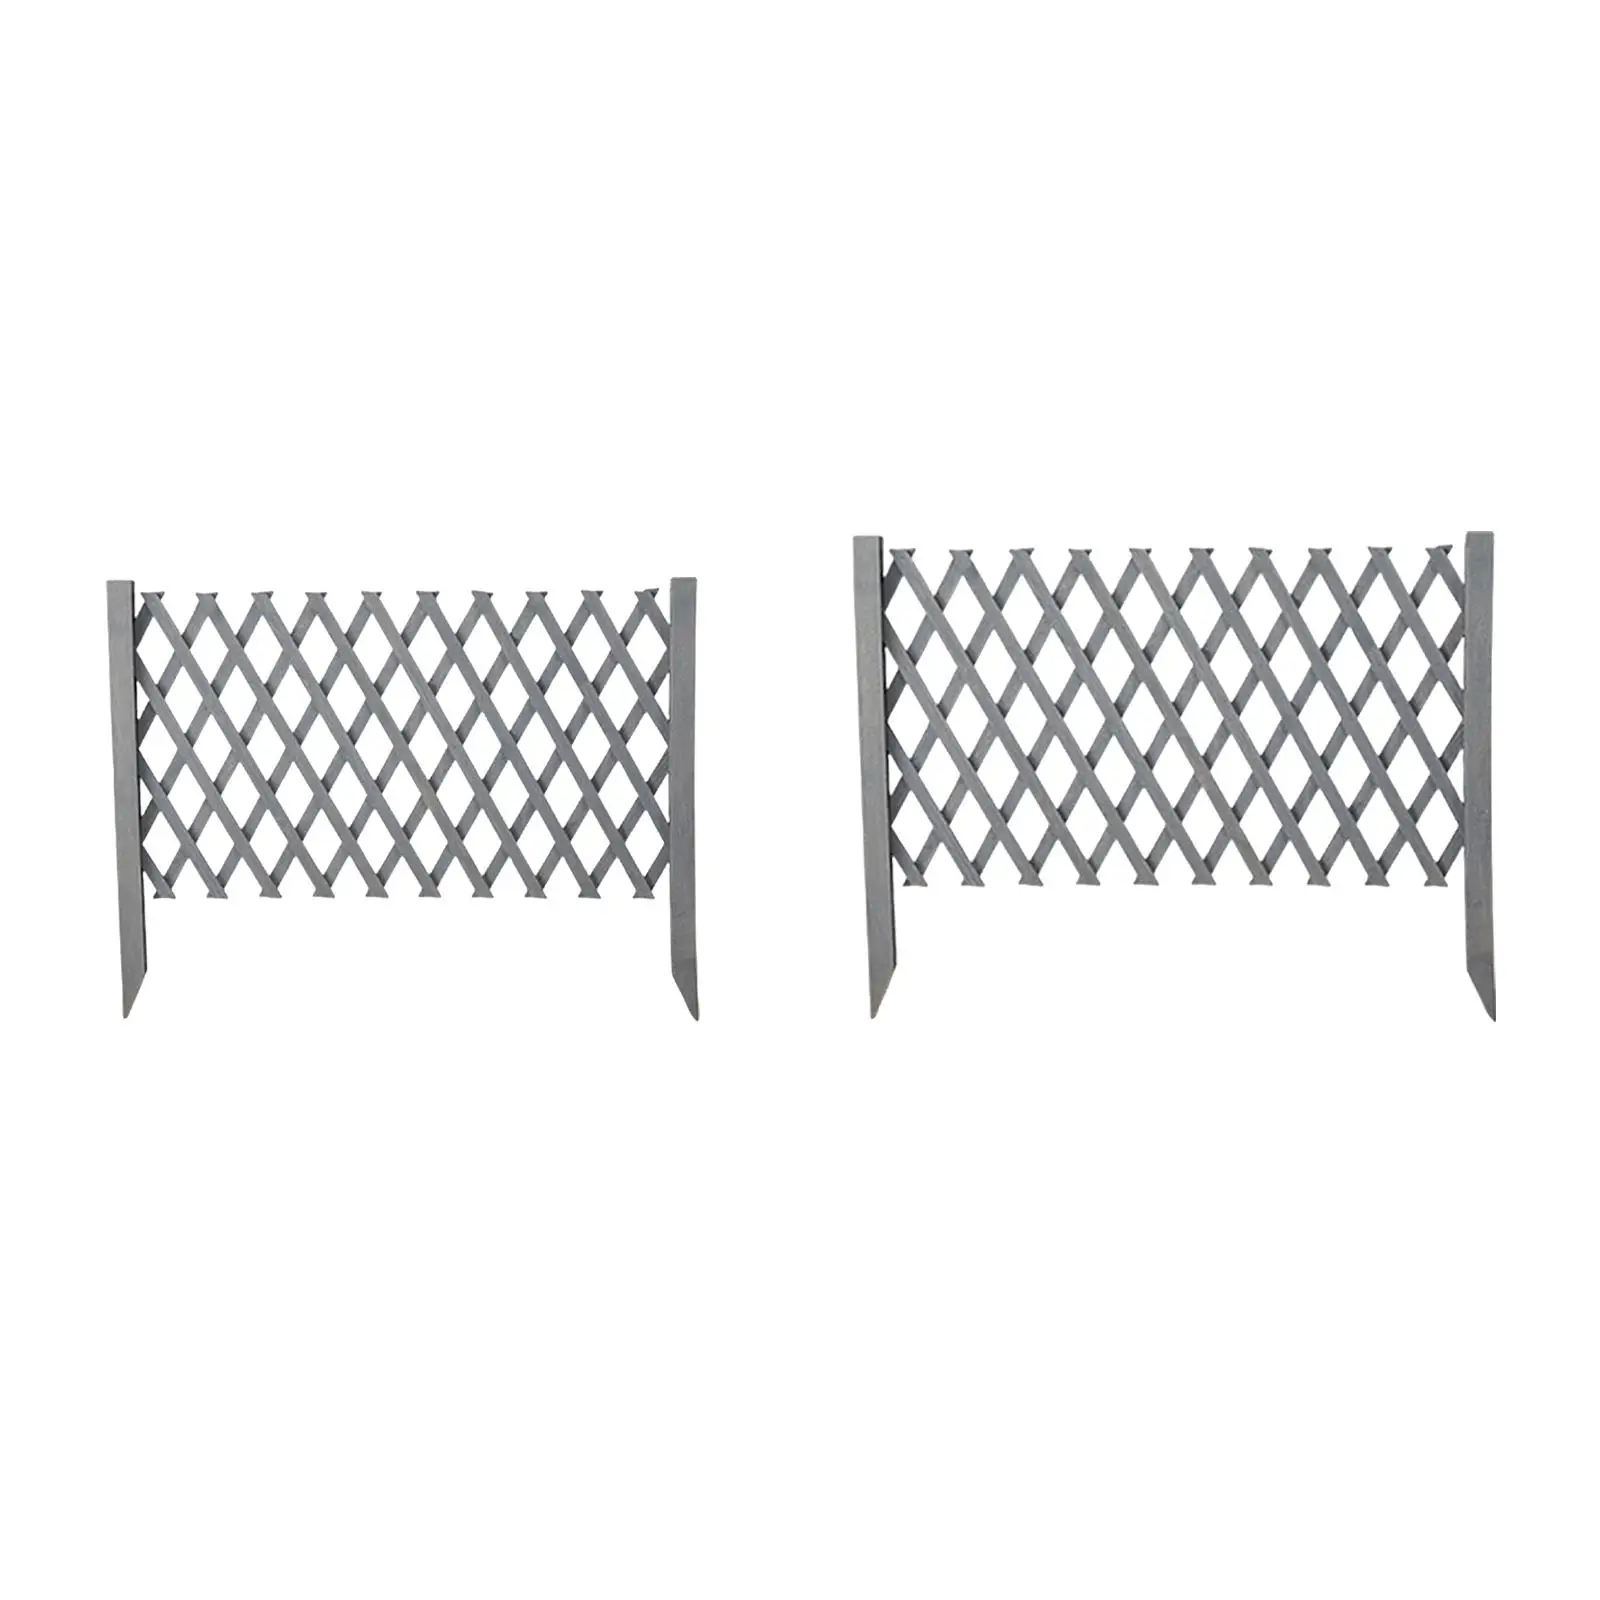 Garden Trellis Fence Wood Fence Partition Expandable Wooden Fence for Restaurant Yard